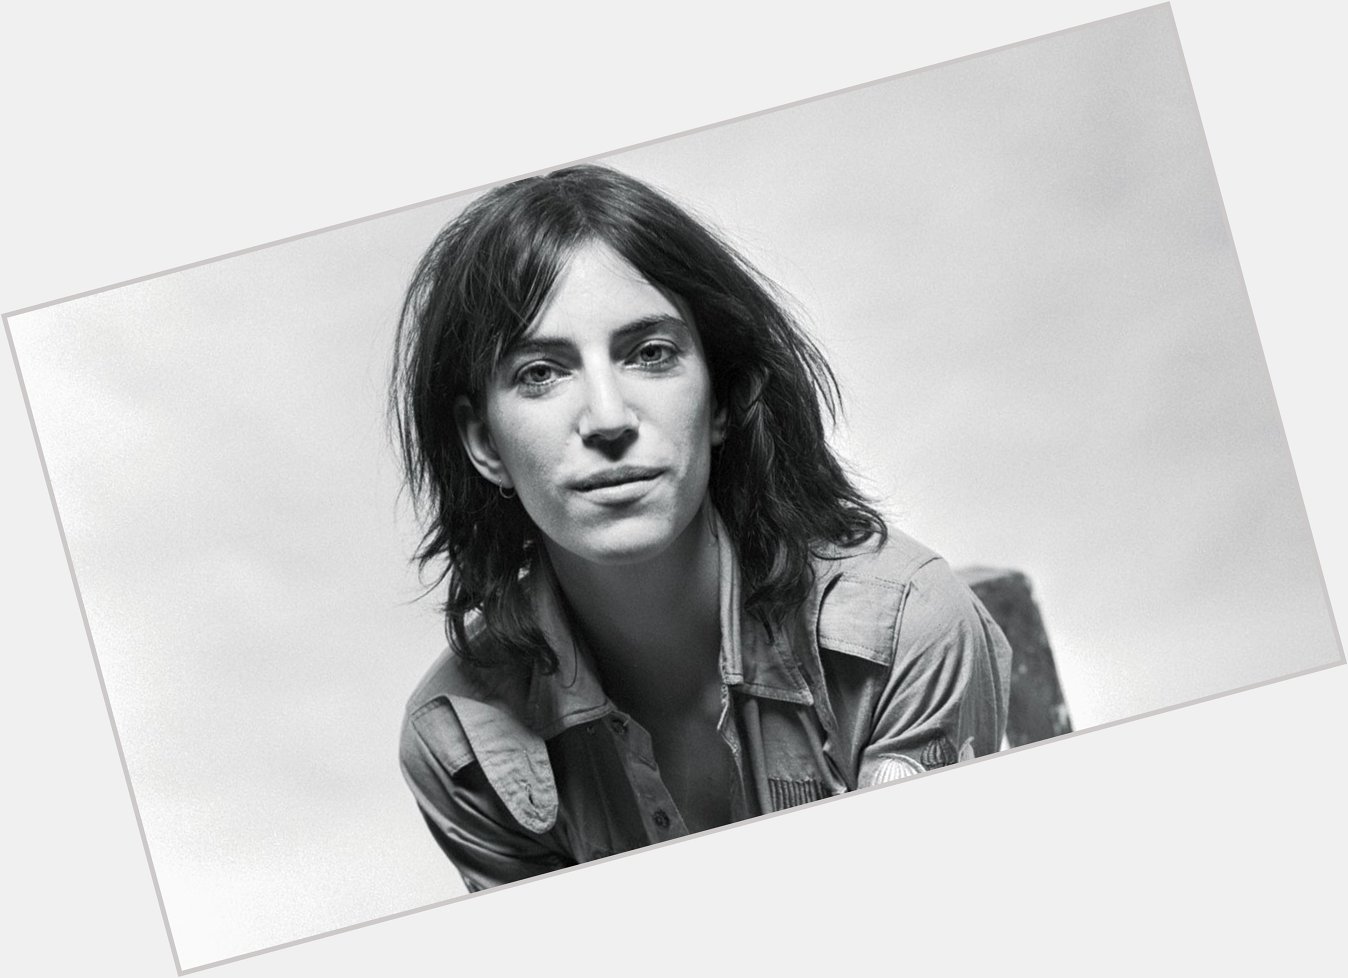 Please join us here at in wishing the one and only Patti Smith a very Happy Birthday today  